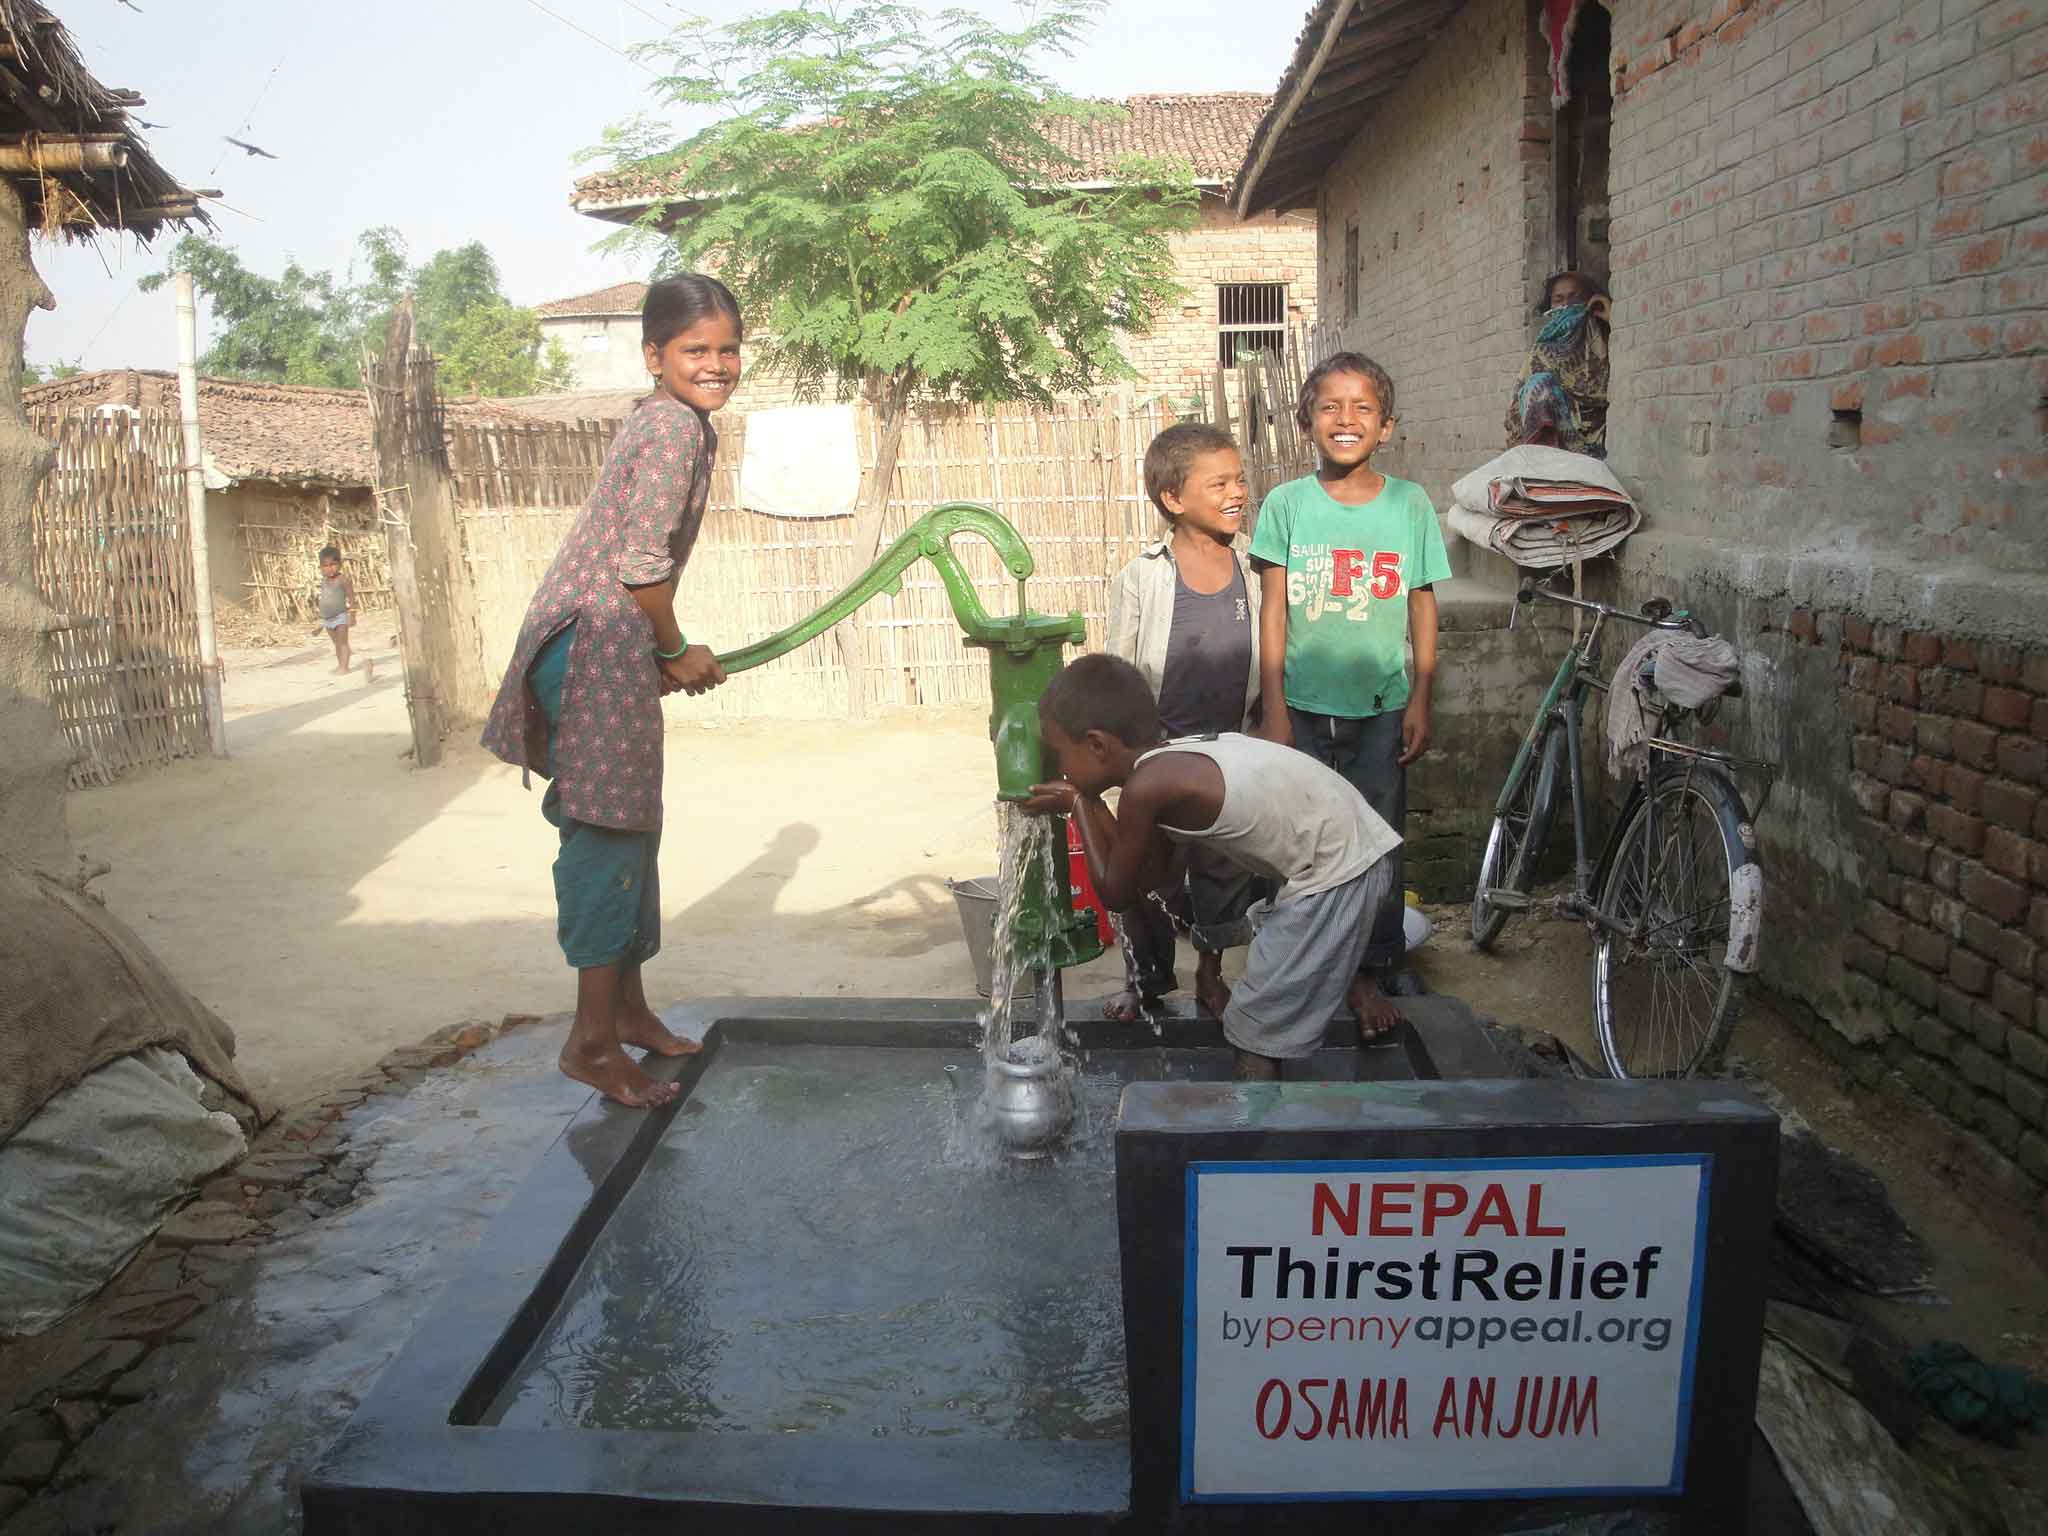 Thirst Relief well in Nepal